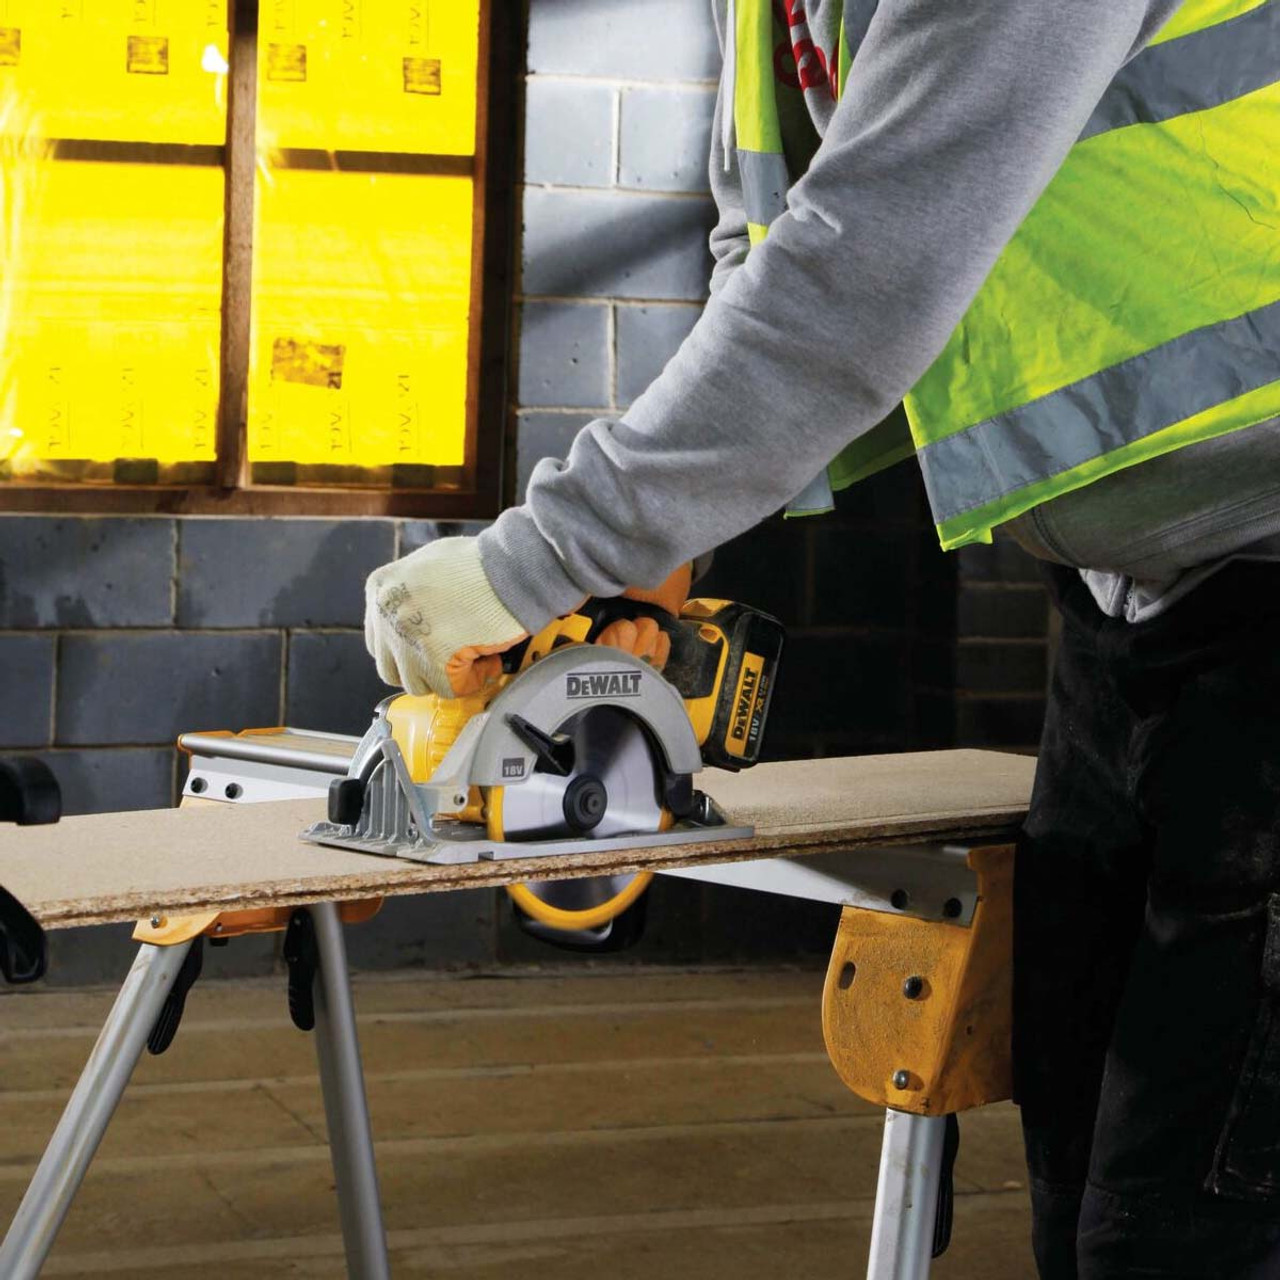 DeWalt circular saw with Intelligent trigger allowing total control over all applications